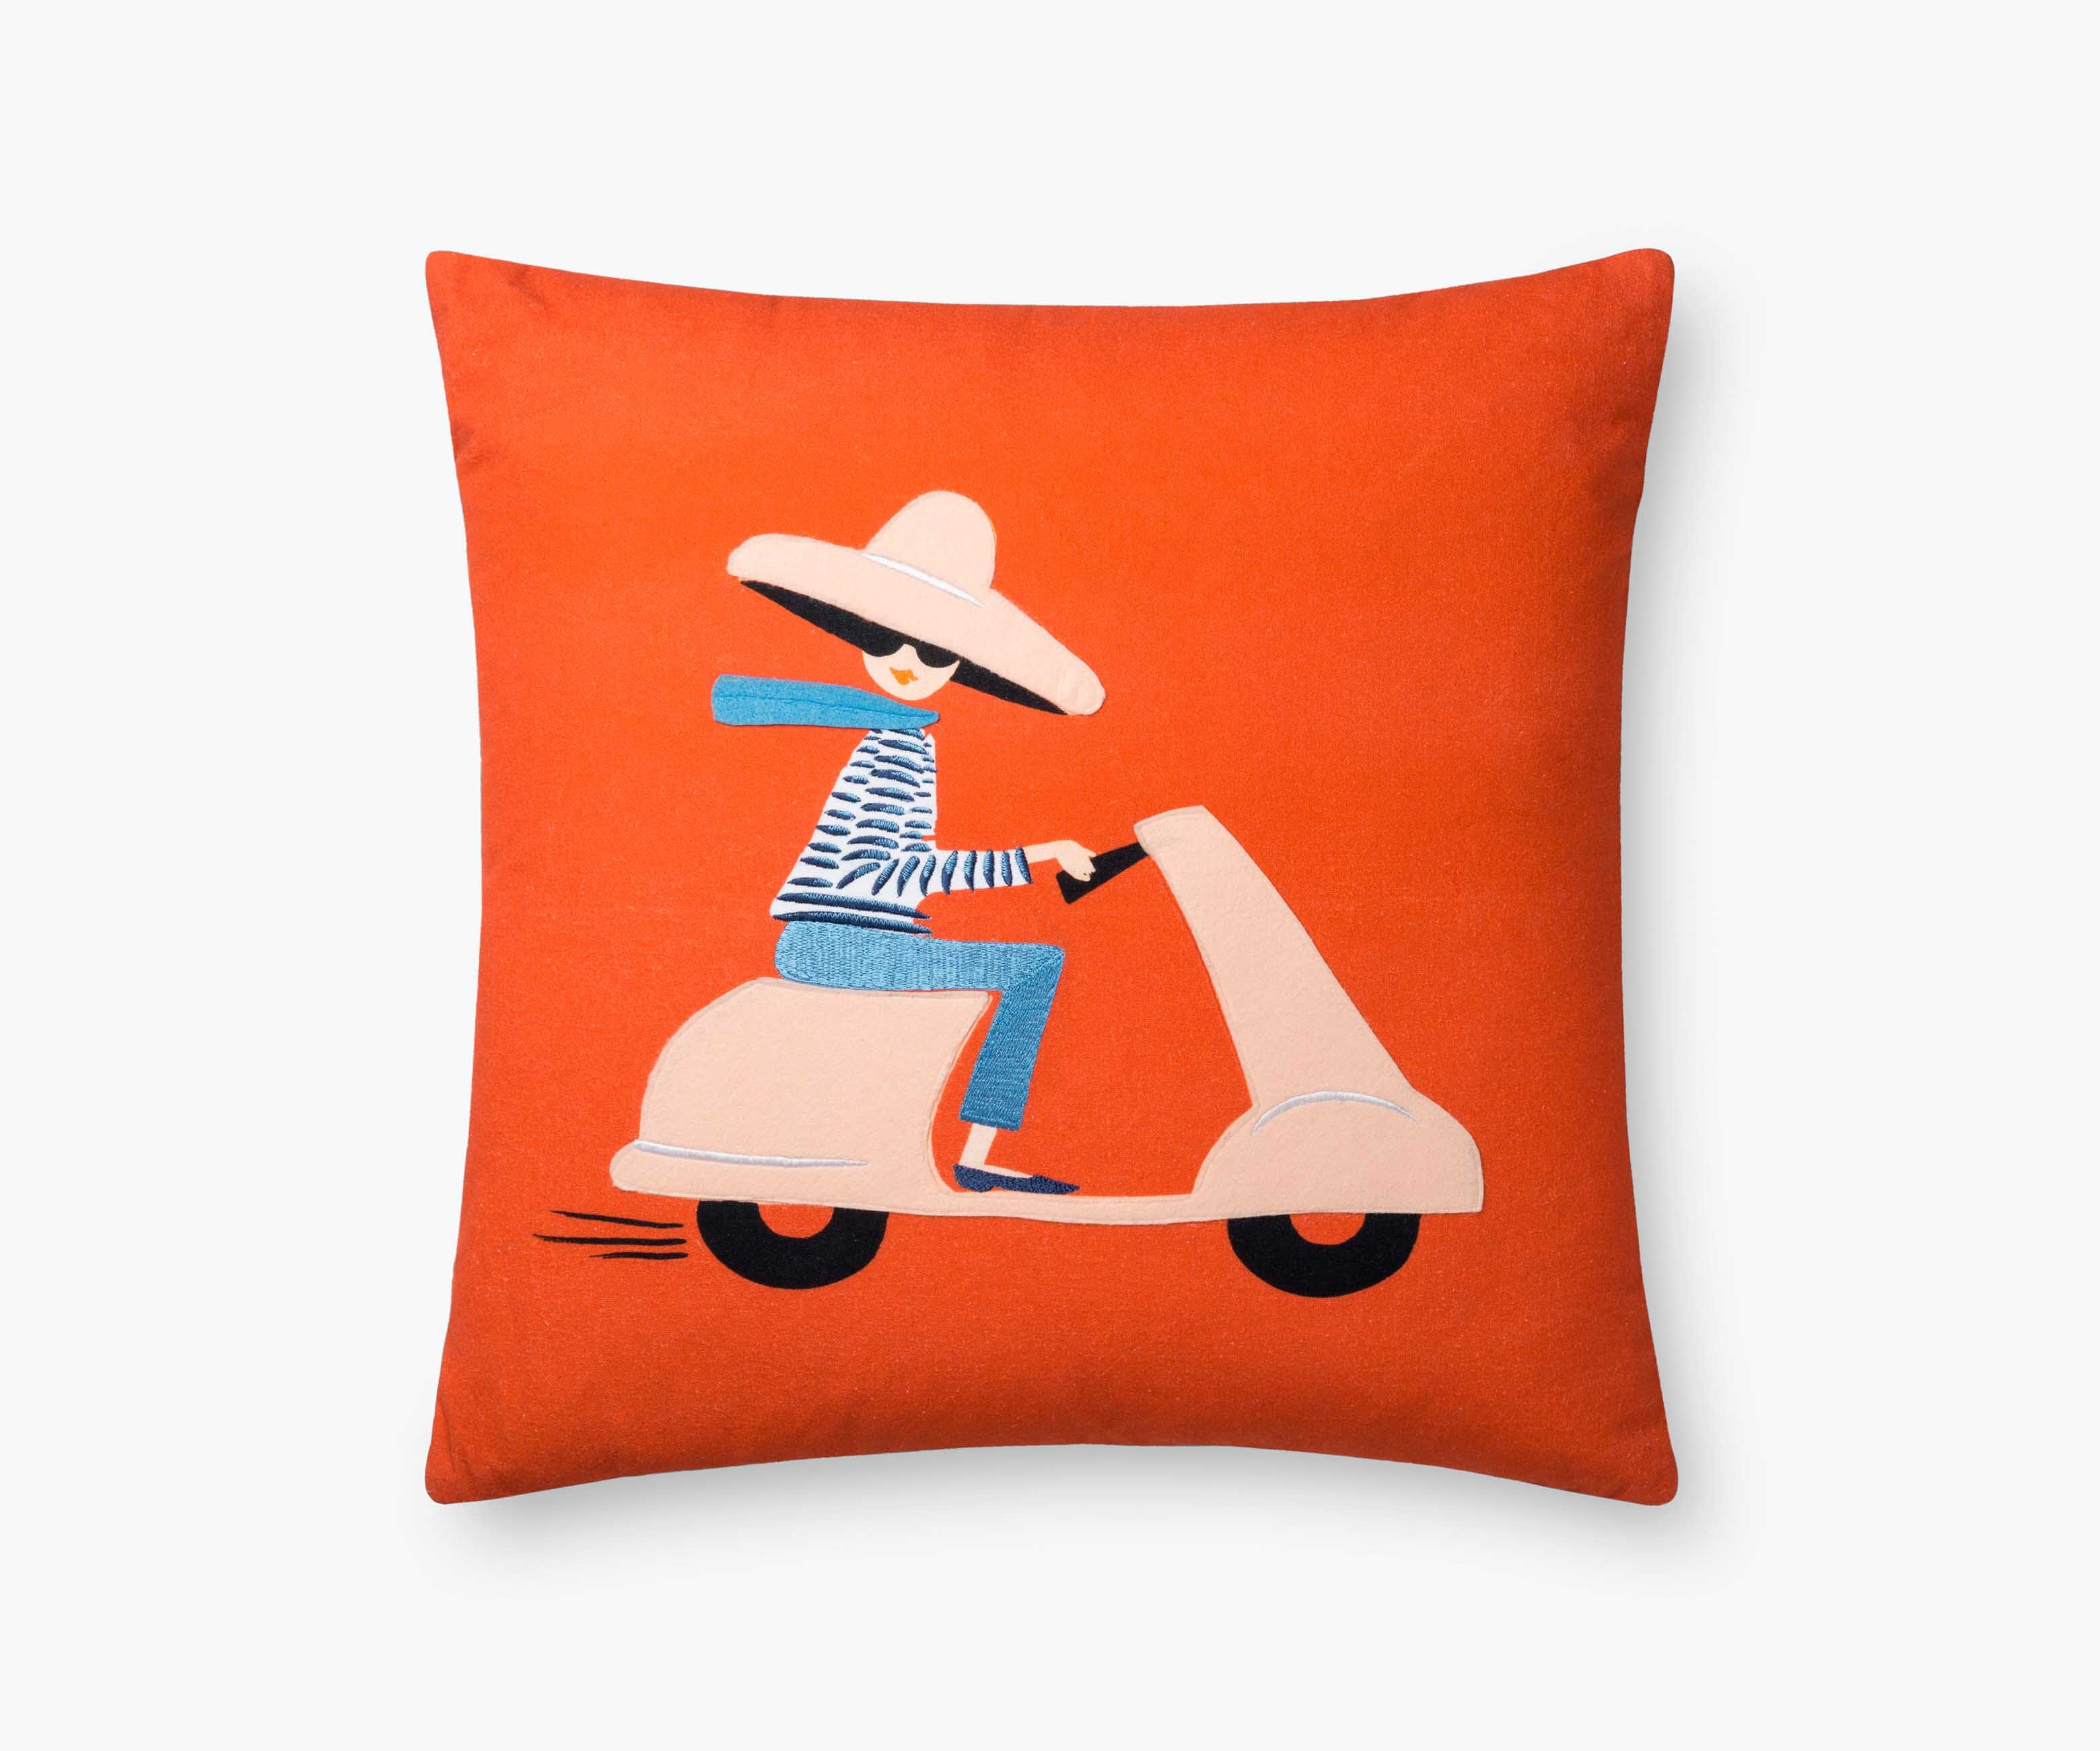 Figurative - Pillows & Throws - Home | Rifle Paper Co.